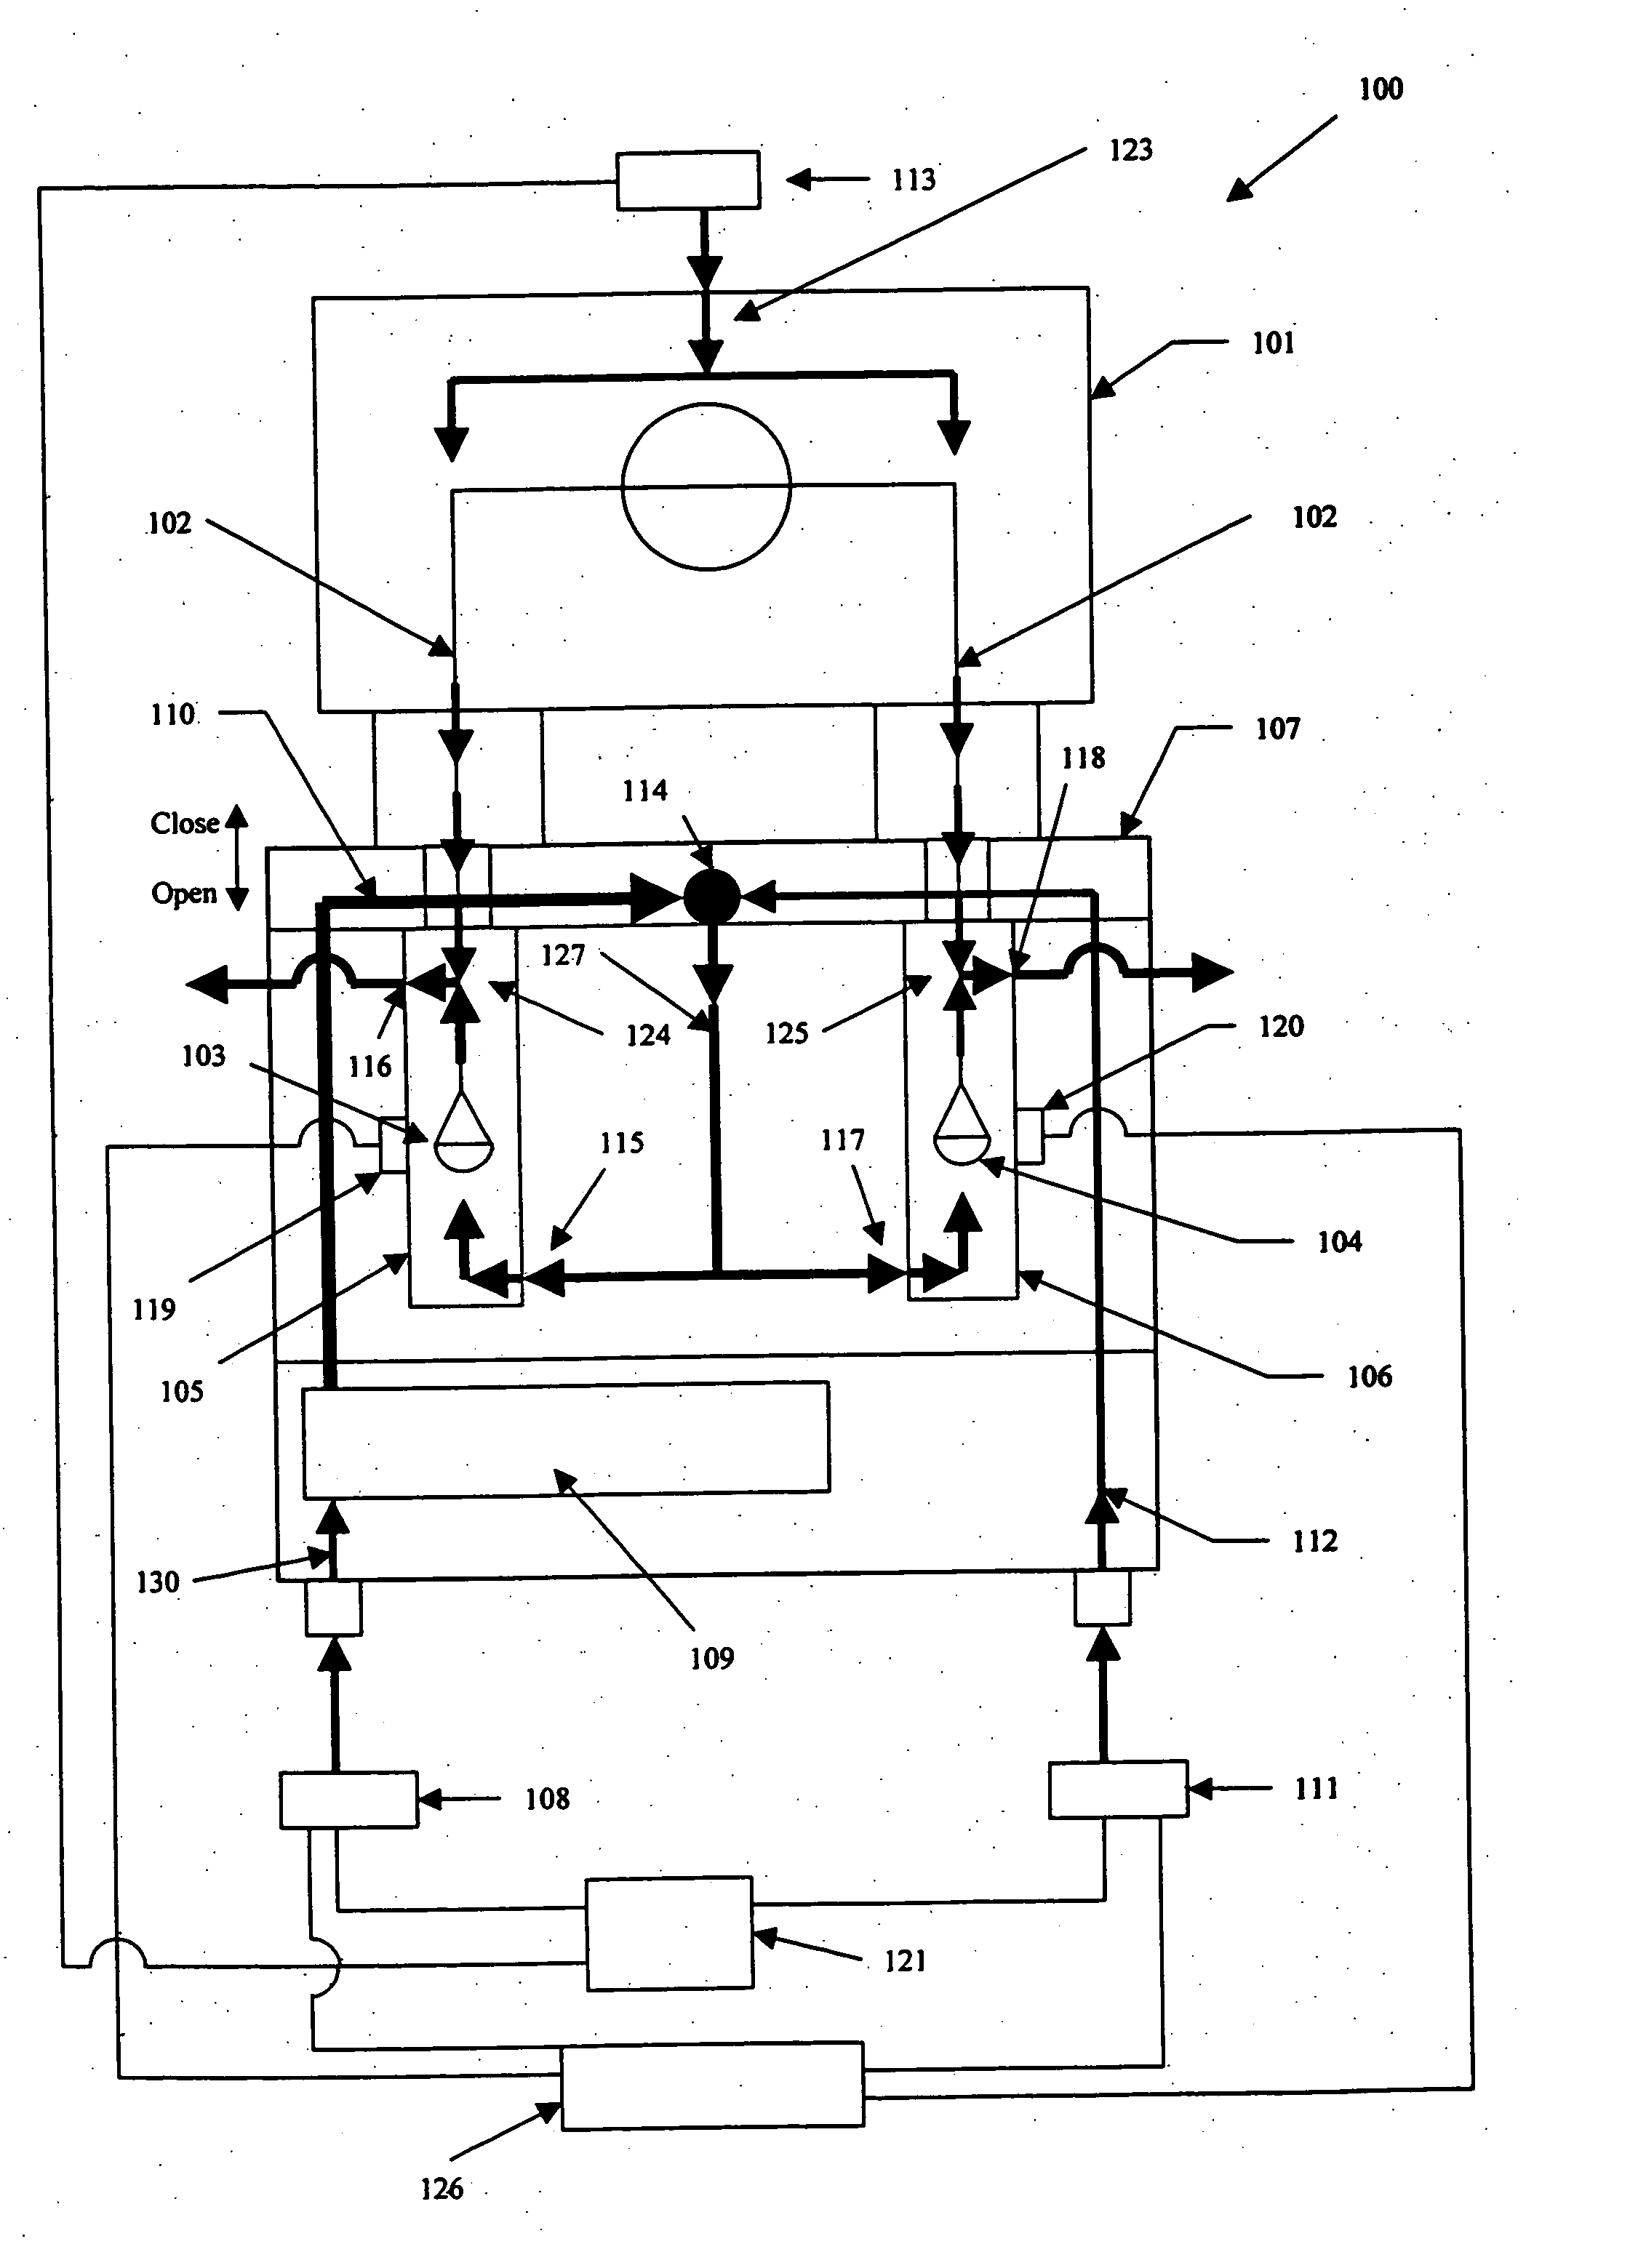 Humidity-controlled chamber for a thermogravimetric instrument